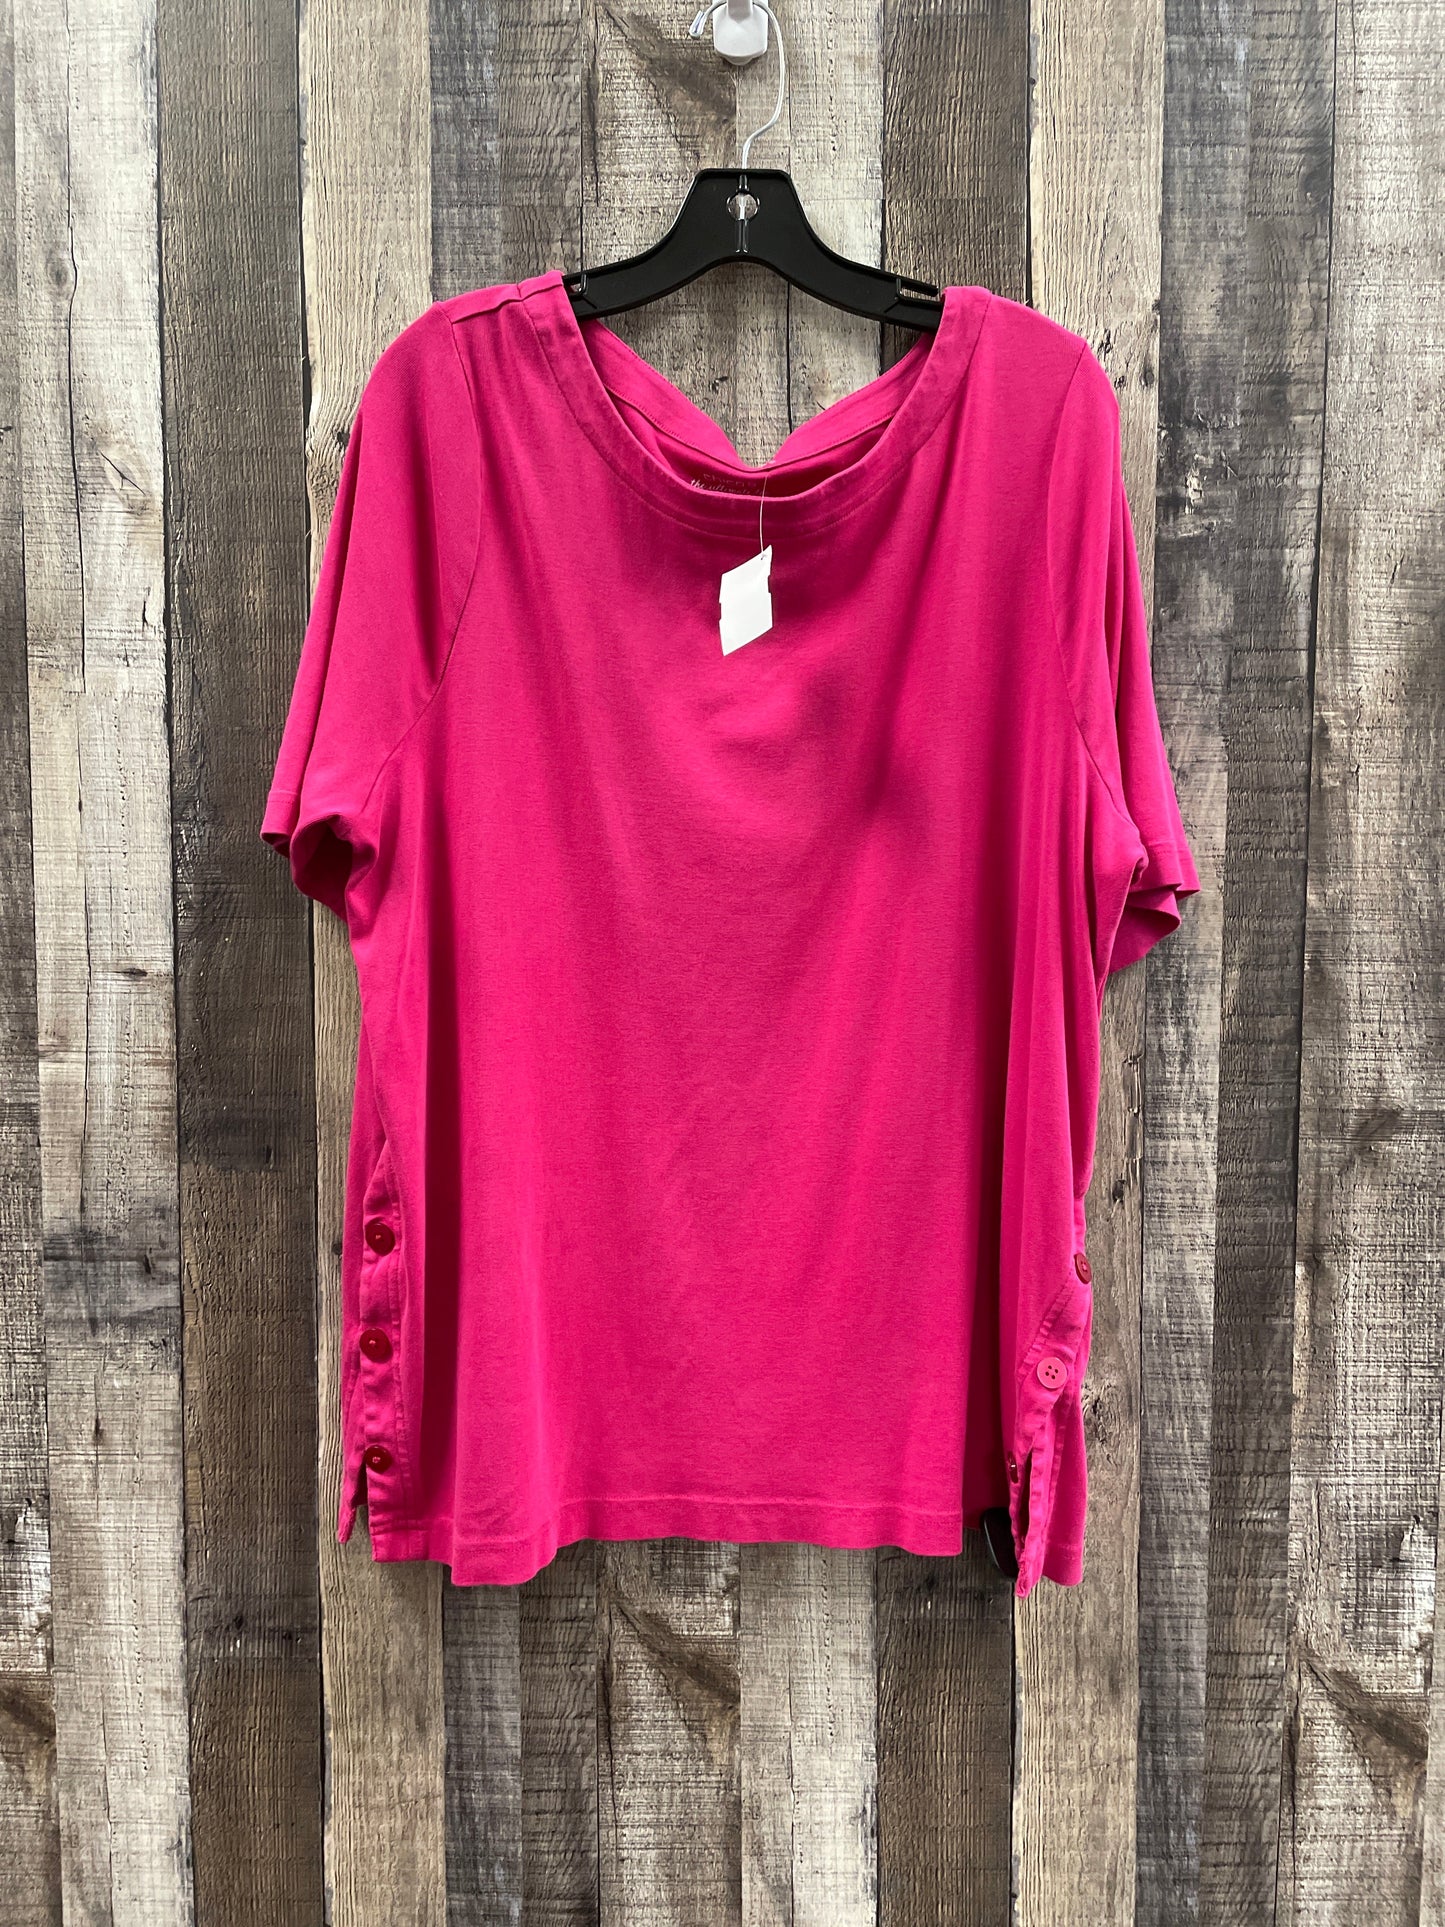 Pink Top Short Sleeve Chicos, Size Xxl